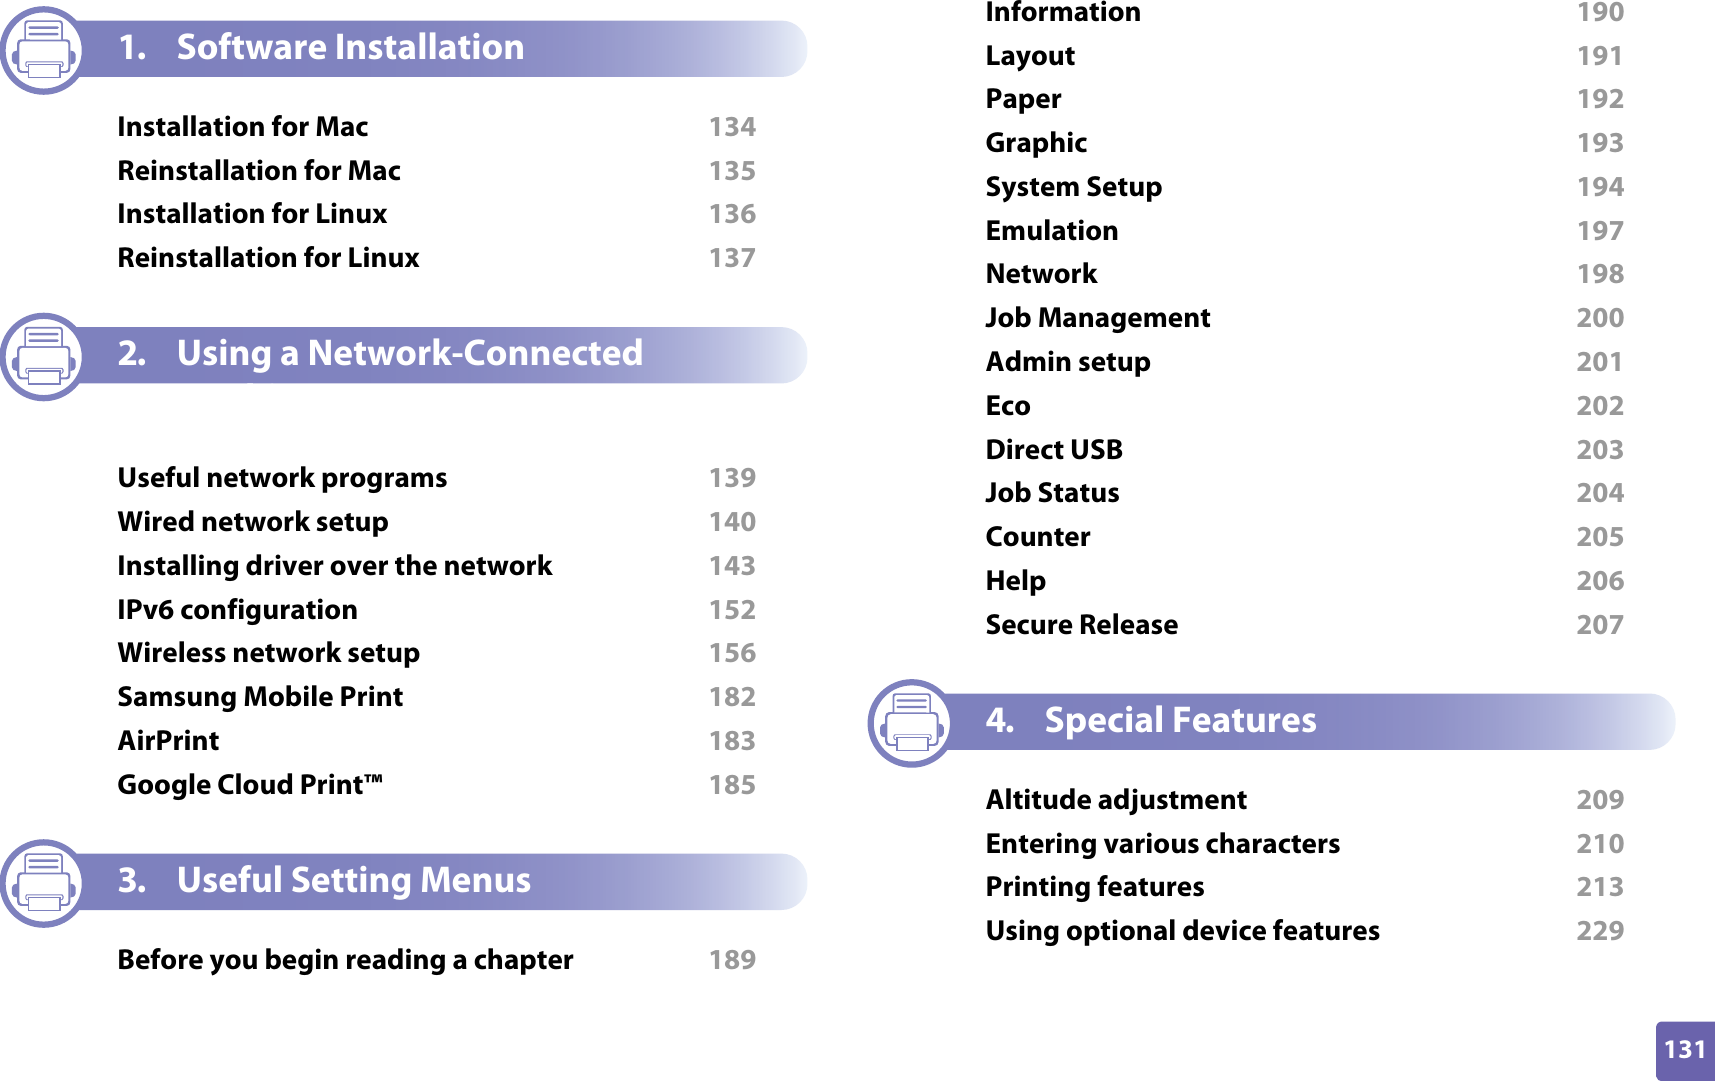 131ADVANCED1. Software InstallationInstallation for Mac  134Reinstallation for Mac  135Installation for Linux  136Reinstallation for Linux  1372. Using a Network-Connected MachineUseful network programs  139Wired network setup  140Installing driver over the network  143IPv6 configuration  152Wireless network setup  156Samsung Mobile Print  182AirPrint  183Google Cloud Print™  1853. Useful Setting MenusBefore you begin reading a chapter  189Information  190Layout  191Paper  192Graphic  193System Setup  194Emulation  197Network  198Job Management  200Admin setup  201Eco  202Direct USB  203Job Status  204Counter  205Help  206Secure Release  2074. Special FeaturesAltitude adjustment  209Entering various characters  210Printing features  213Using optional device features  229